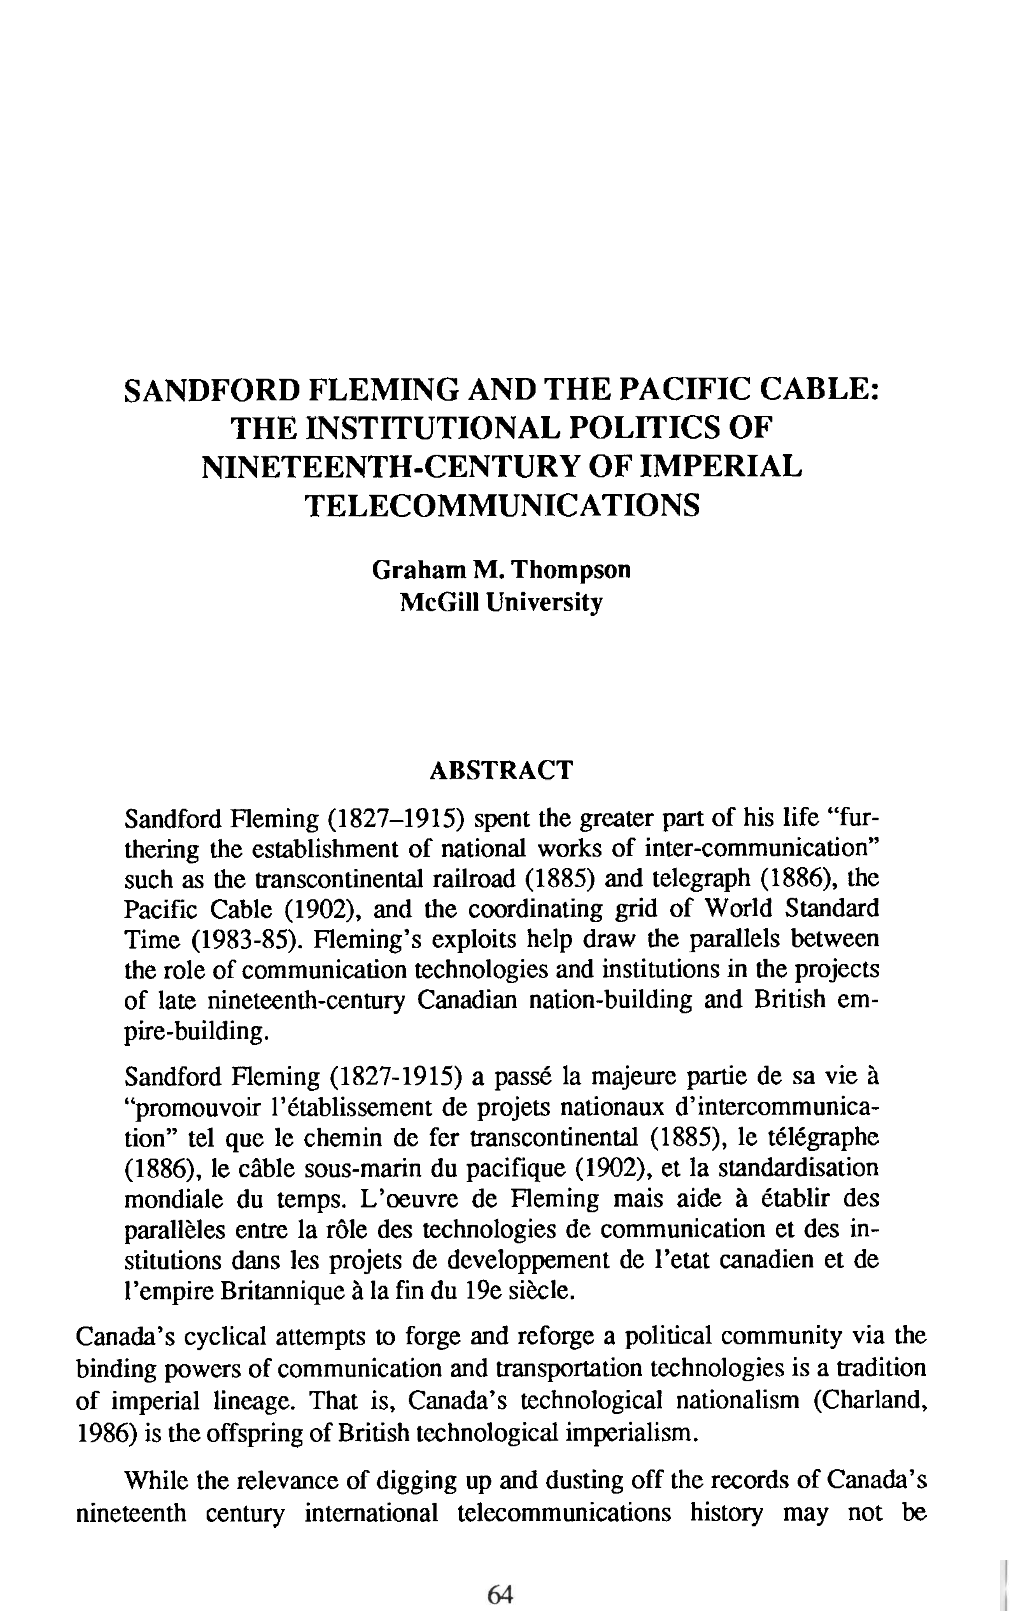 Sandford Fleming and the Pacific Cable: the Institutional Politics of Nineteenth-Century of Imperial Telecommunications